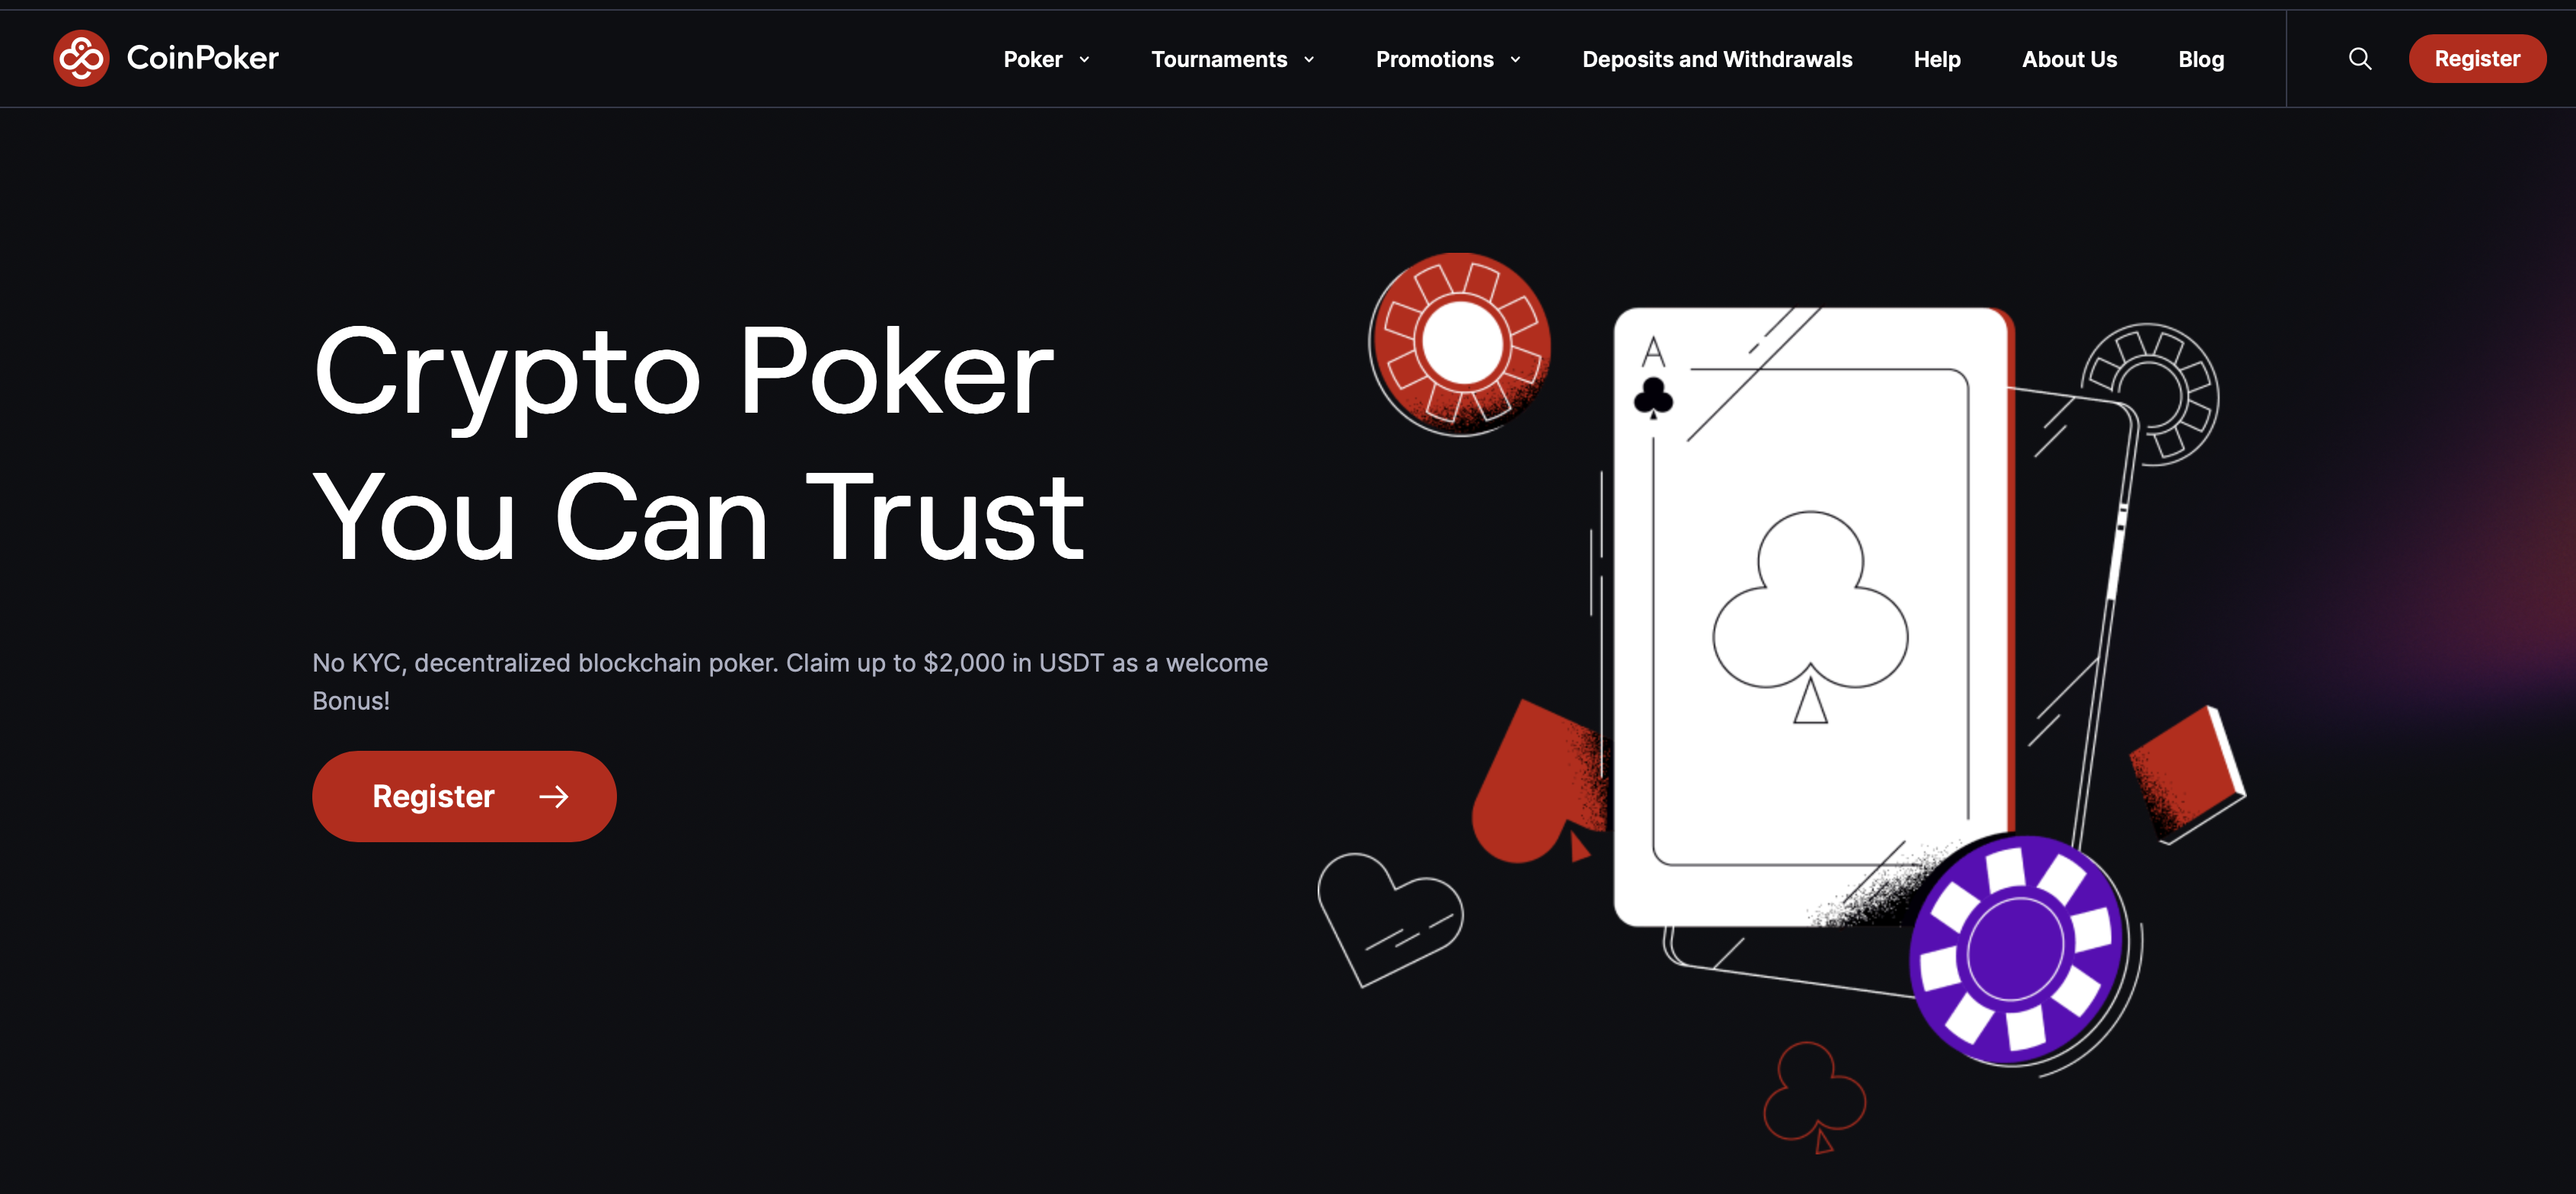 Crypto Poker Made Easy – CoinPoker’s $2,000 Welcome Bonus and More